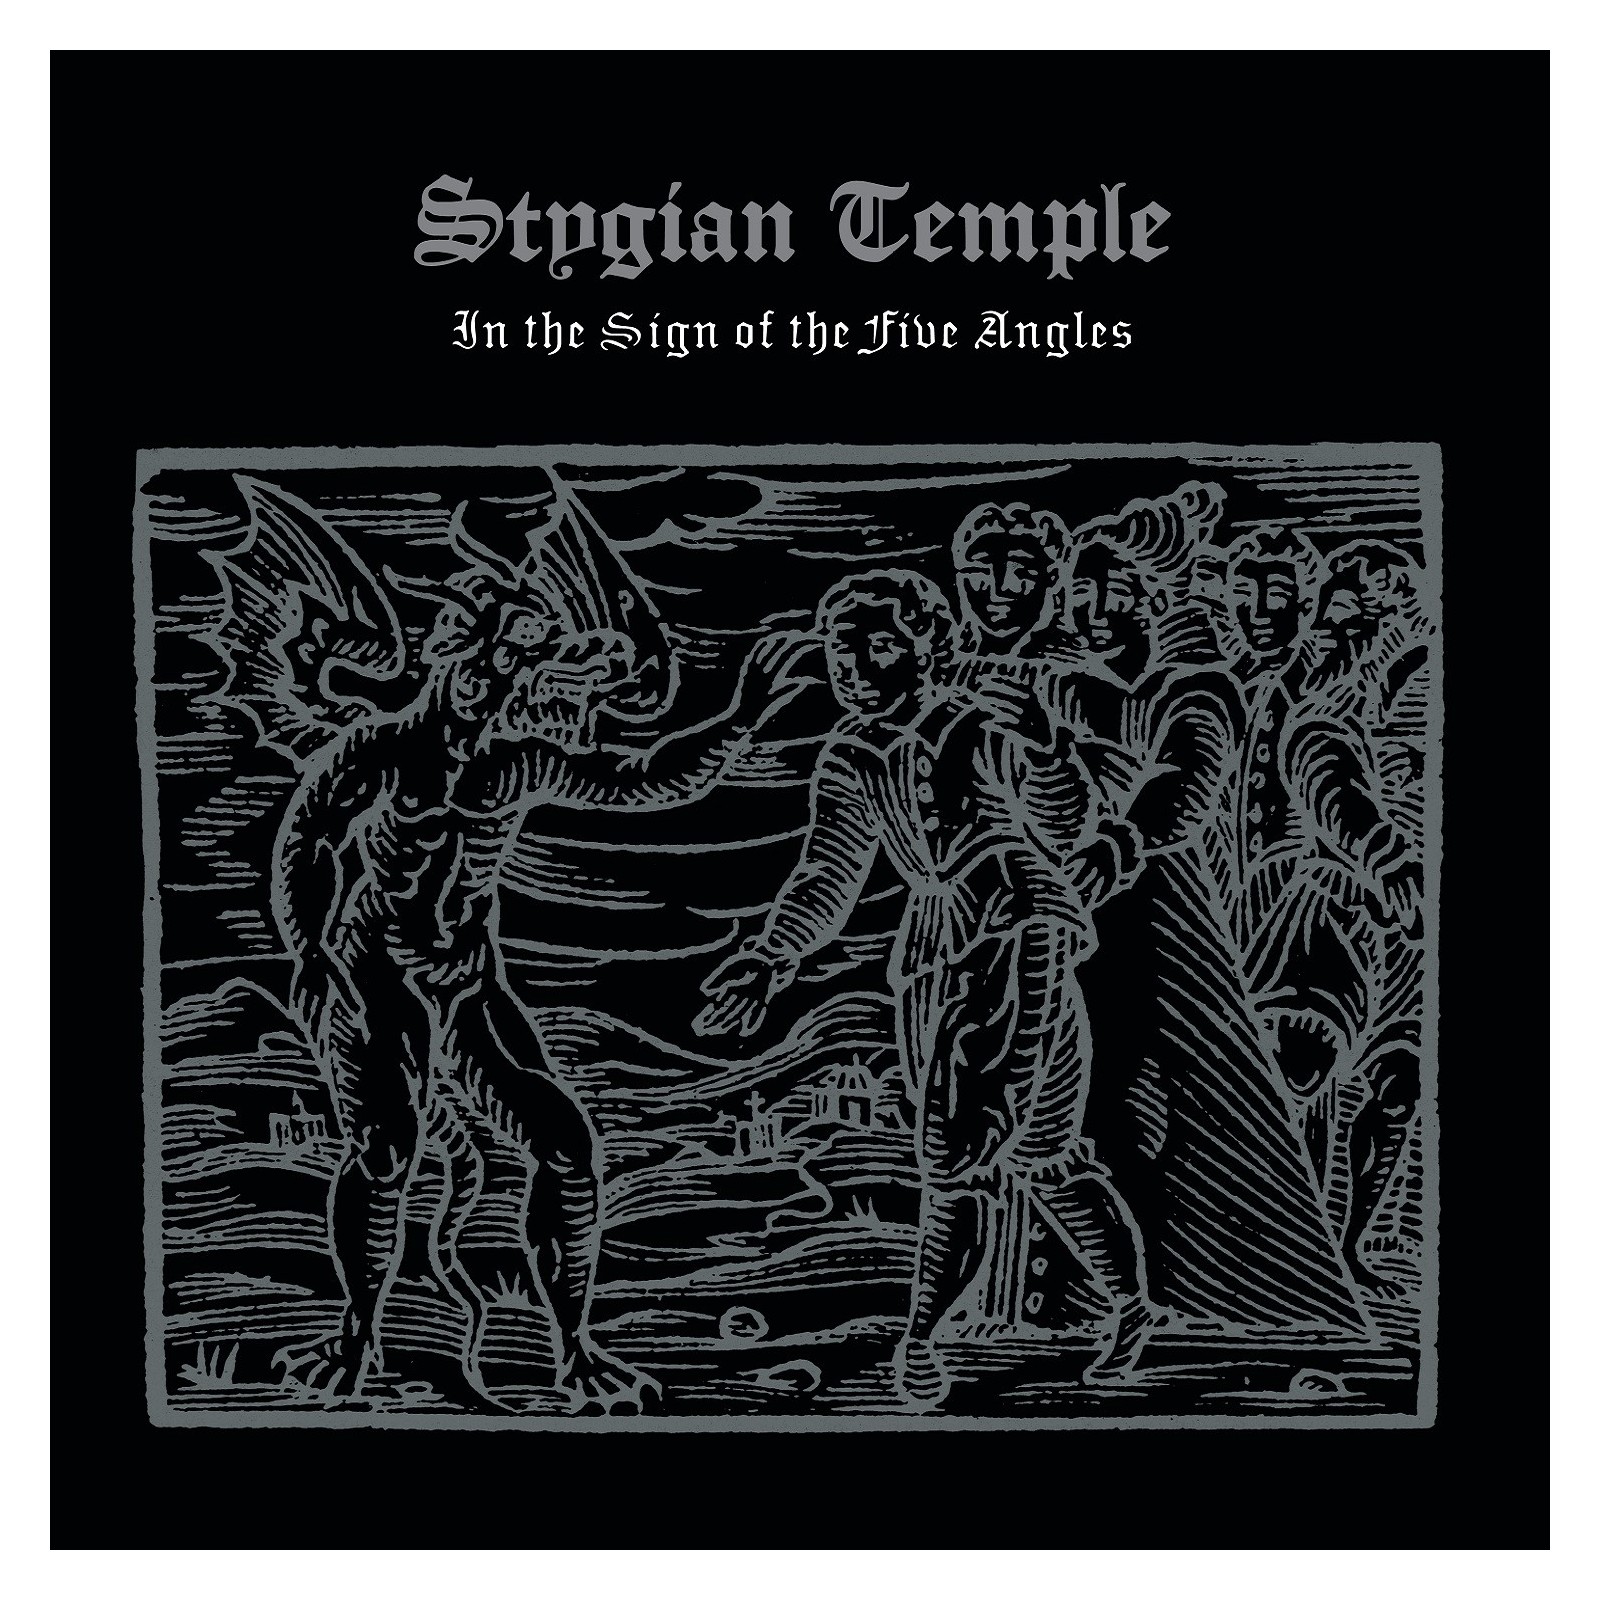 stygian-temple-in-the-sign-of-the-five-angles-lp2x.jpg